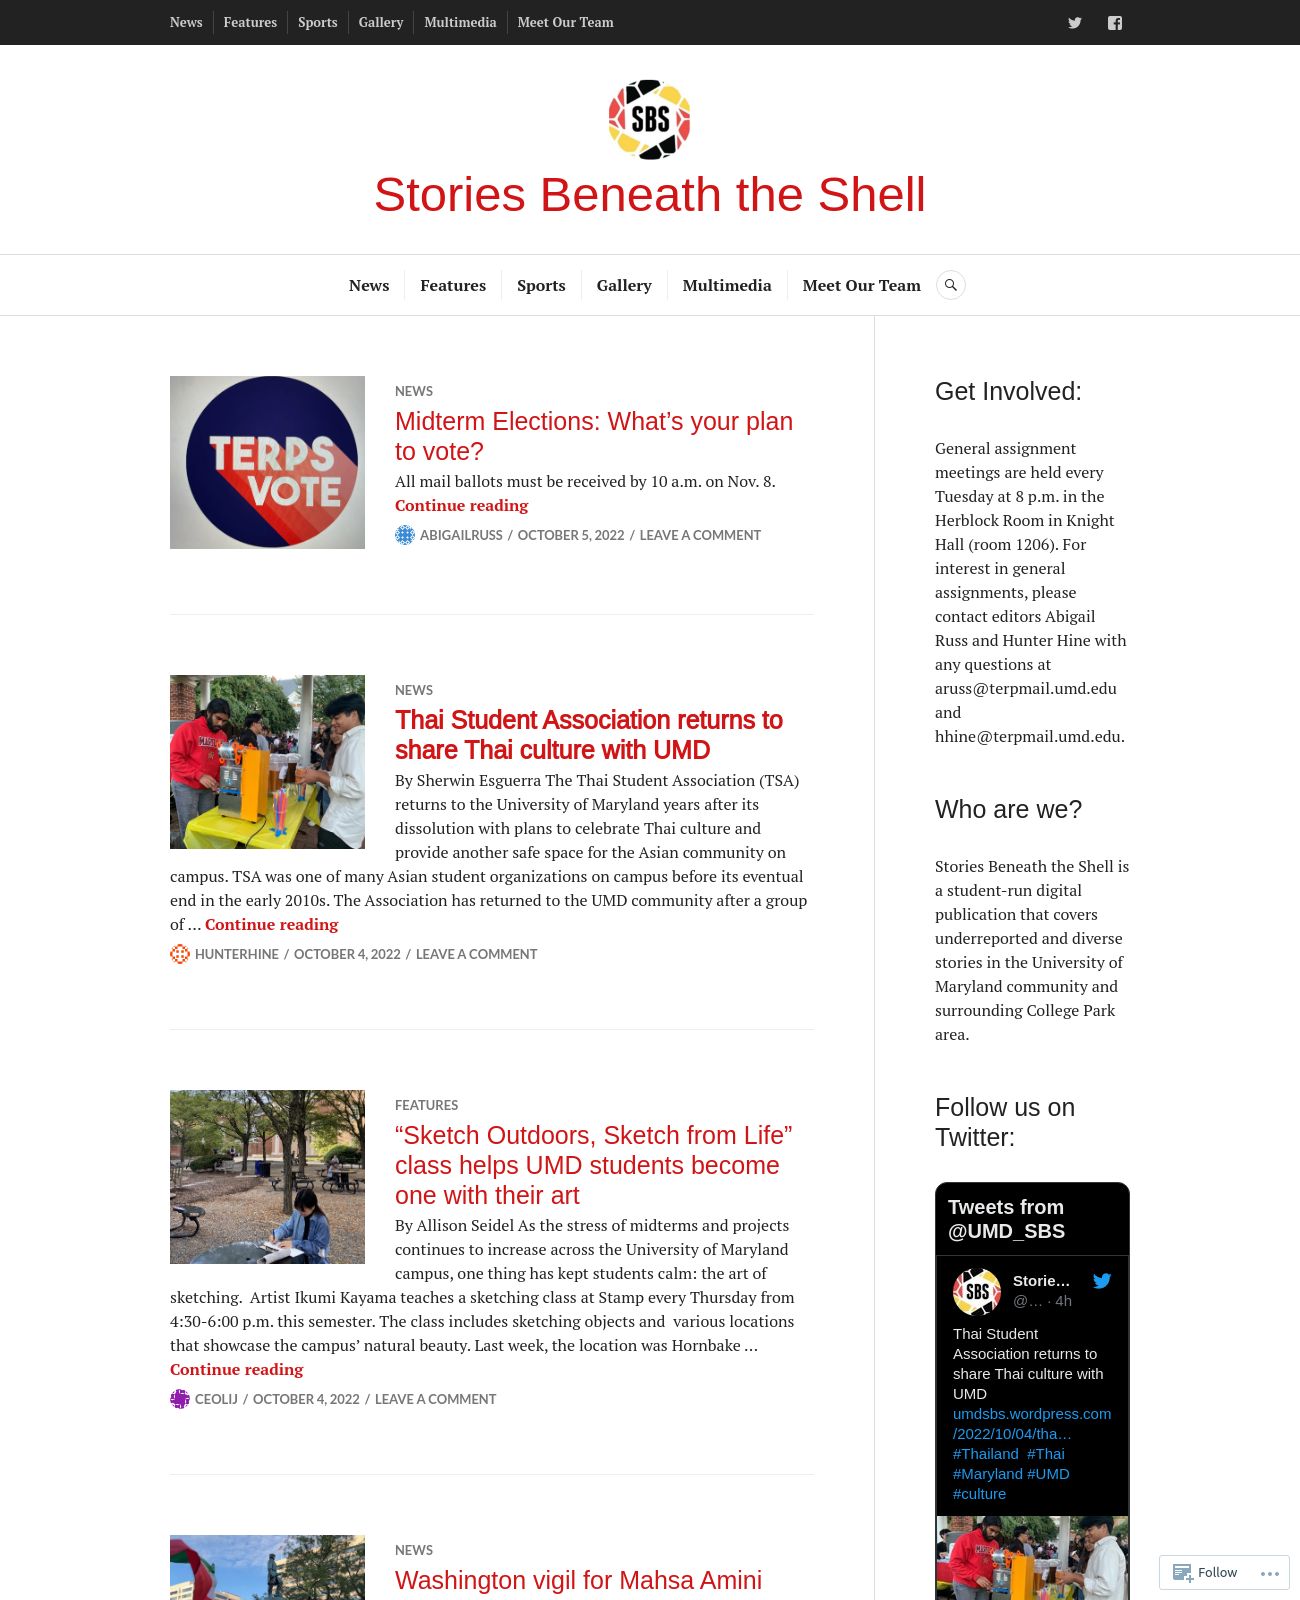 Stories Beneath the Shell at 2022-10-04 23:34:51-04:00 local time